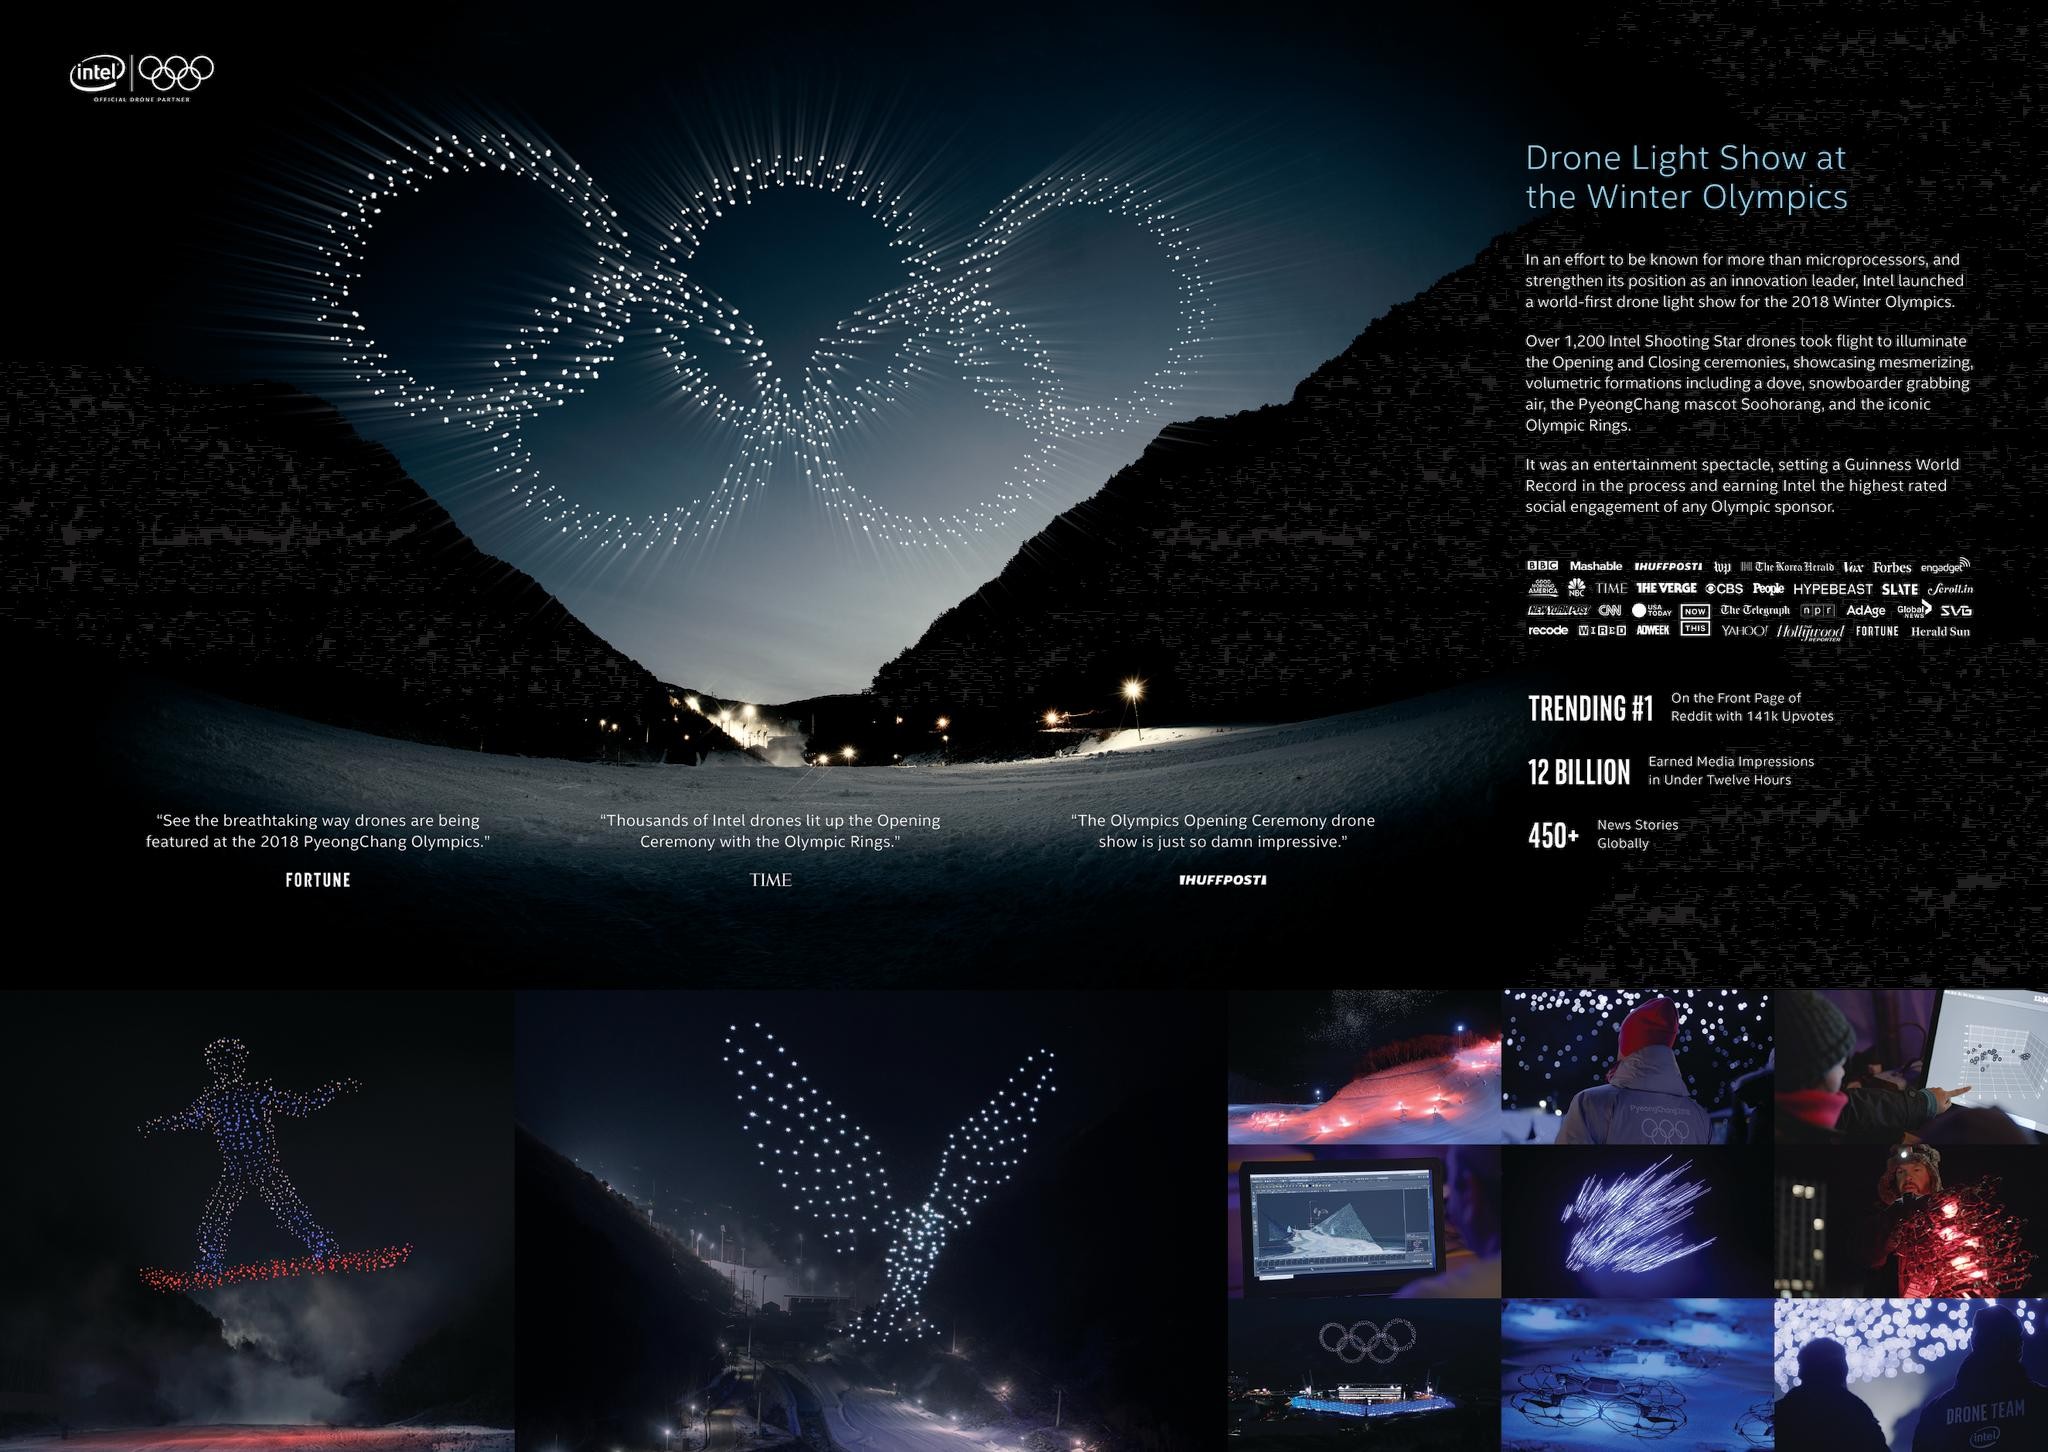 INTEL DRONE LIGHT SHOW AT THE OLYMPICS